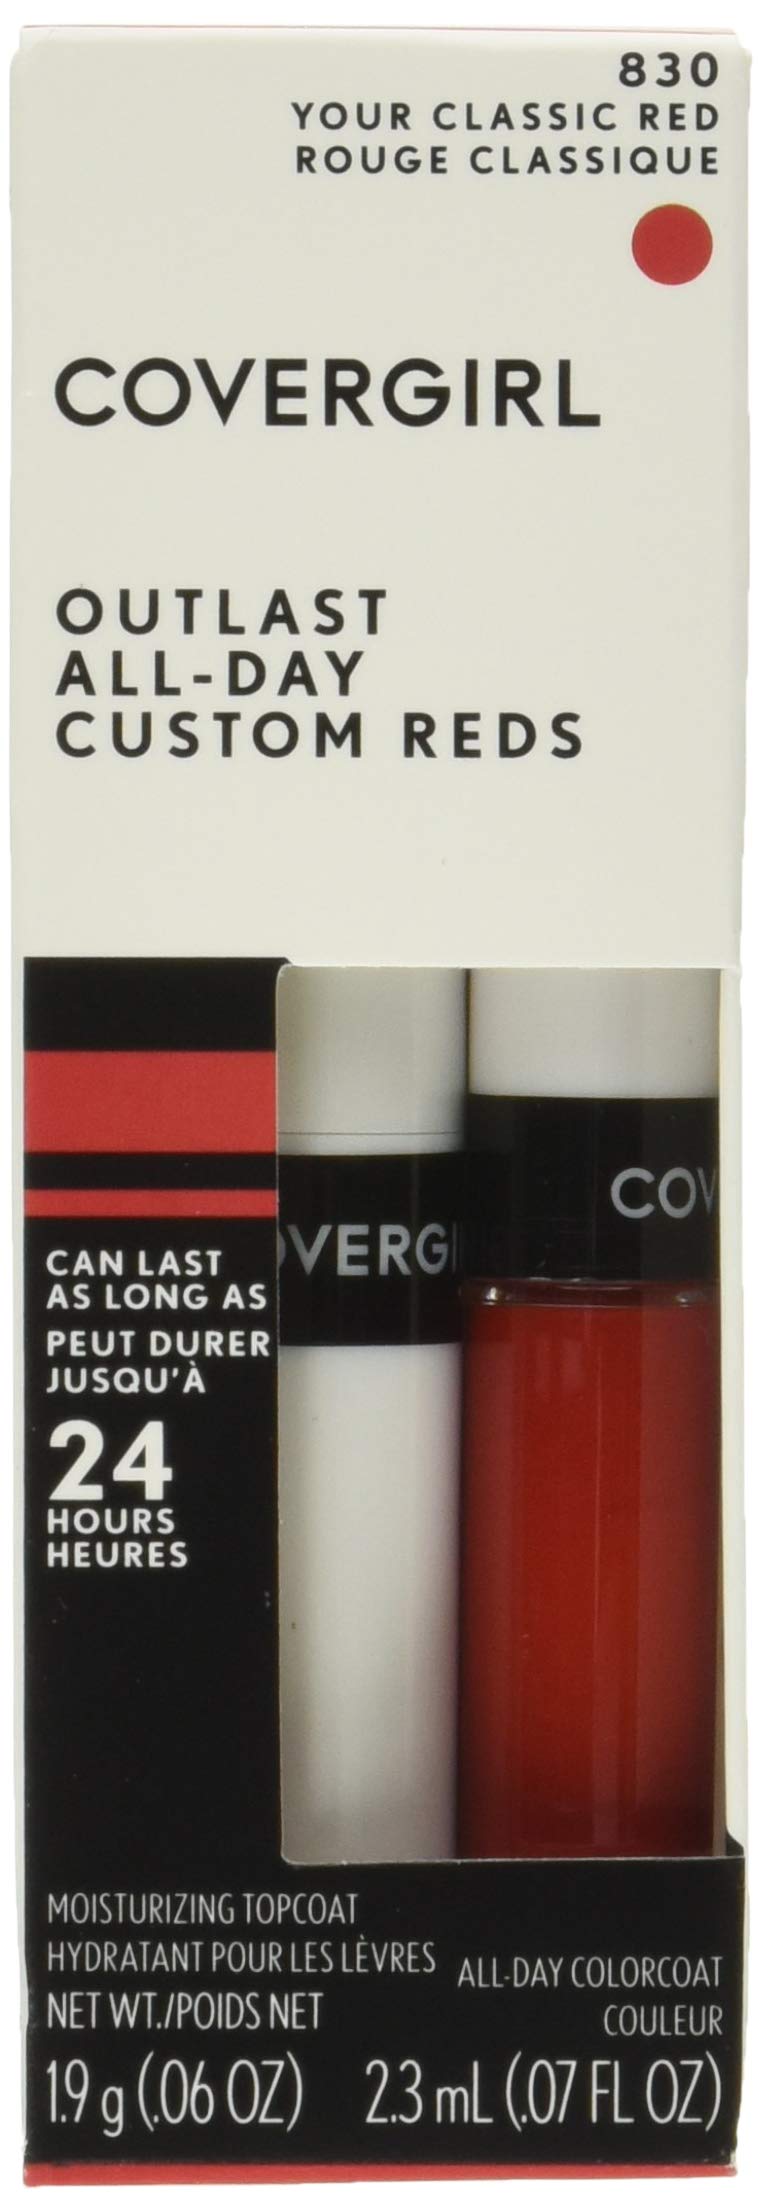 [Australia] - COVERGIRL Outlast All-Day Lip Color Custom Reds, Your Classic Red,1 Set 